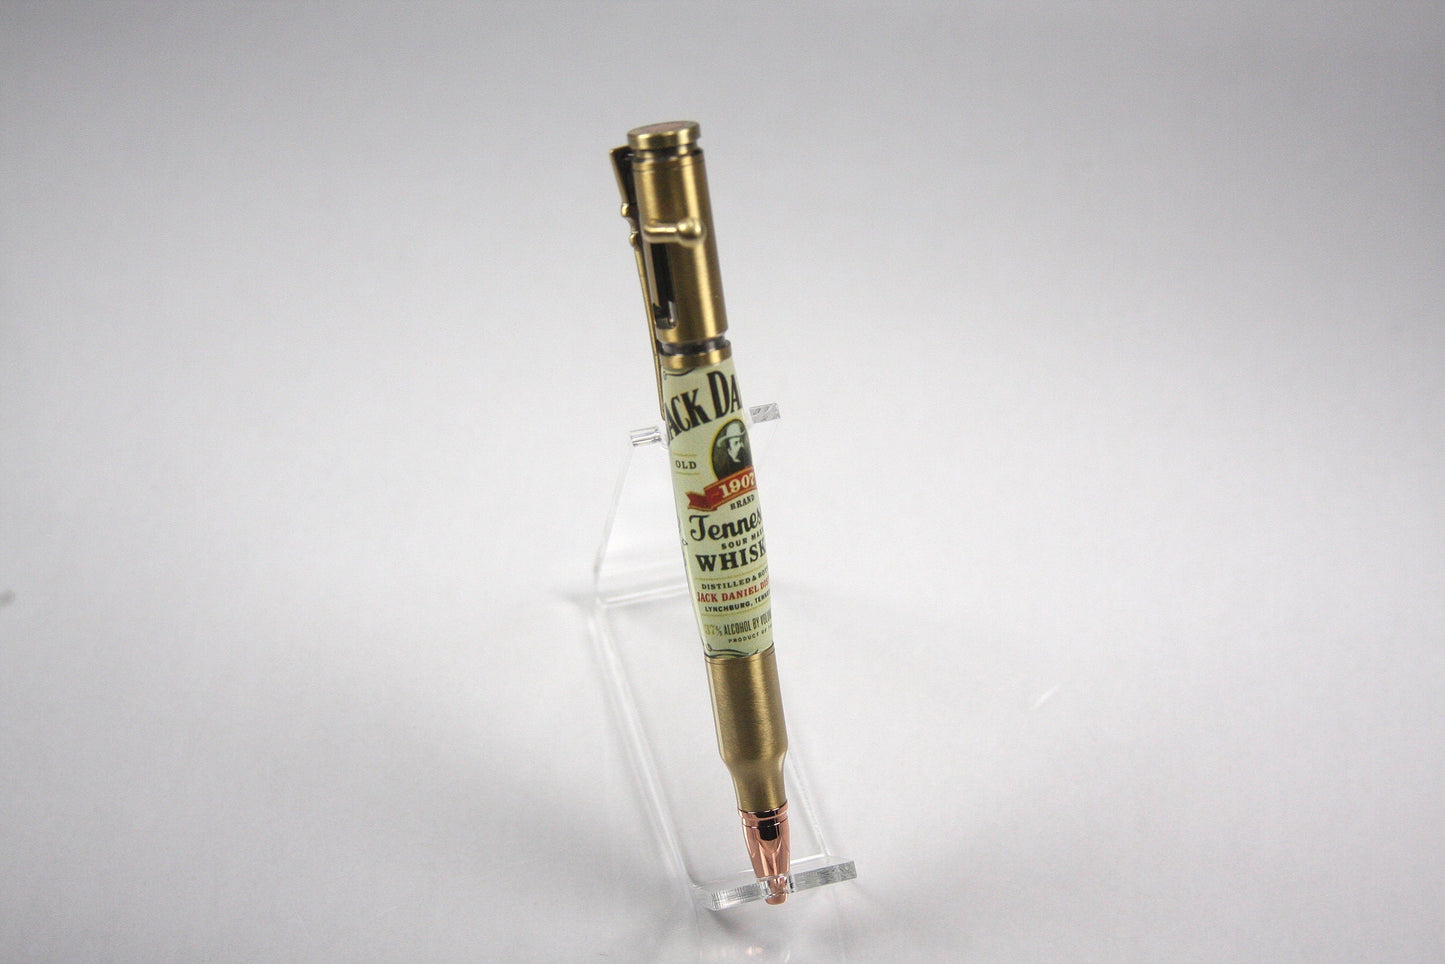 Hand Crafted Antique Brass Bolt-Action Ballpoint Writing Pen